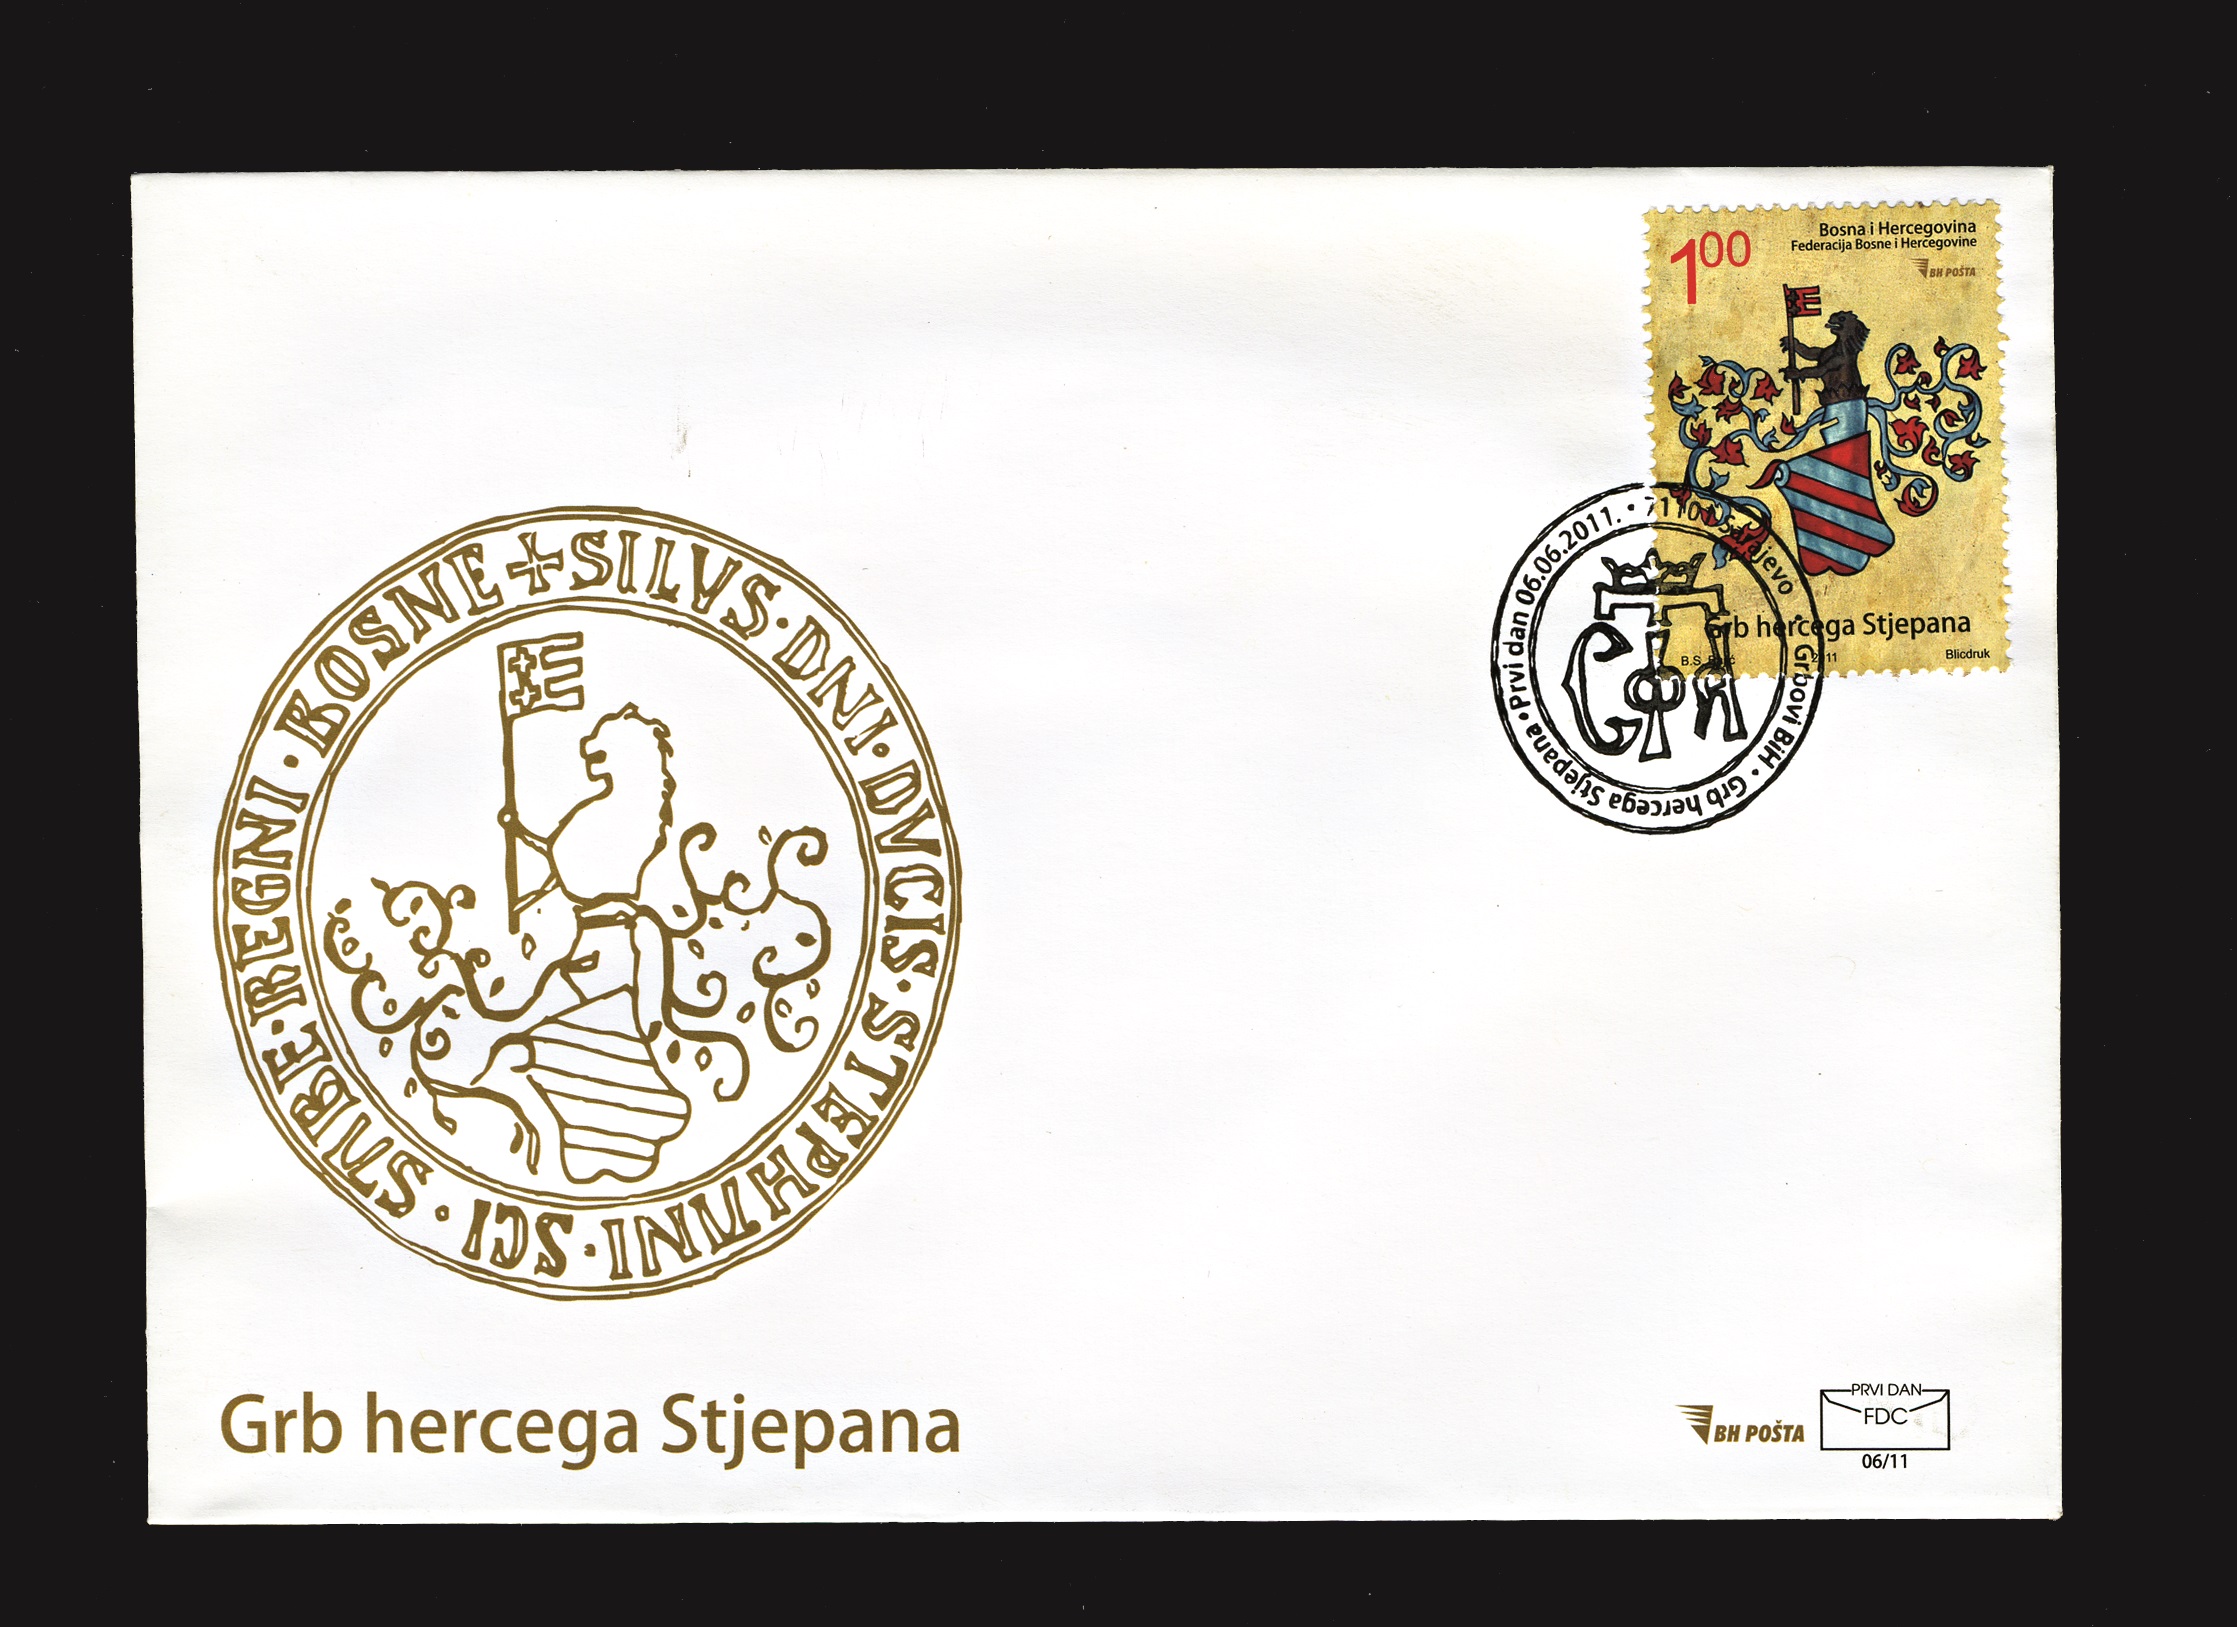 herceg-stjepans-coats-of-arms-fdc